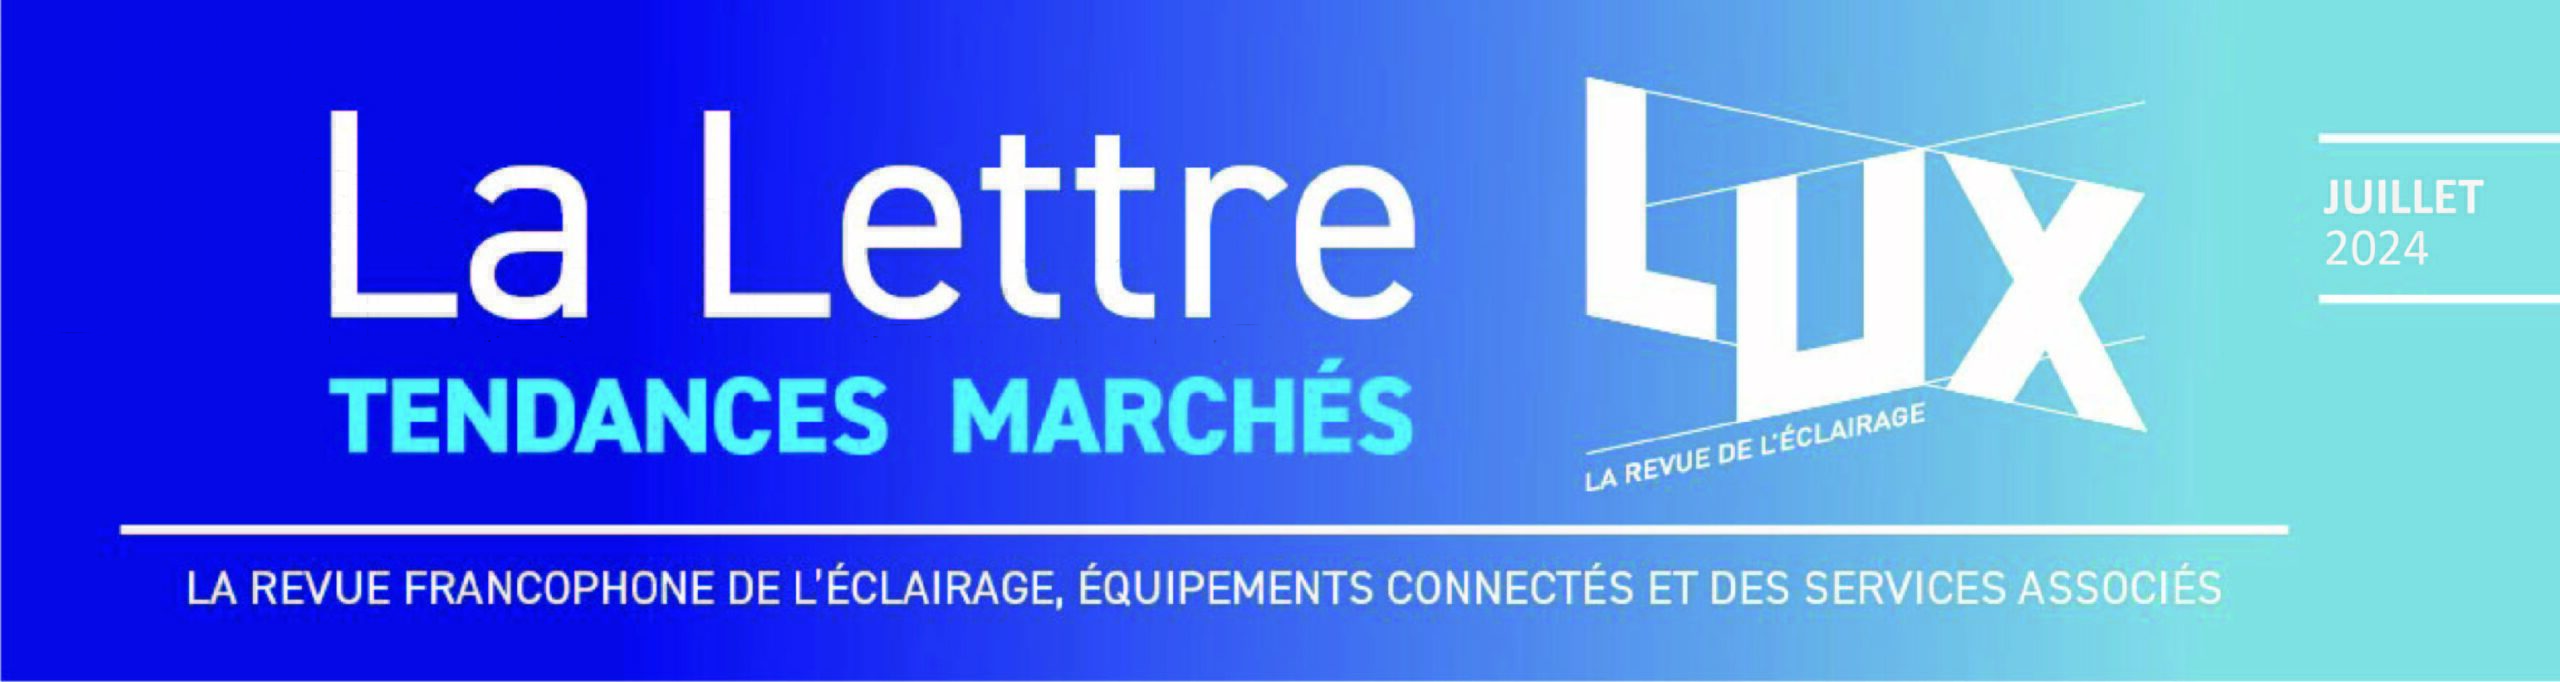 newsletter_LUX_MARCHES_7